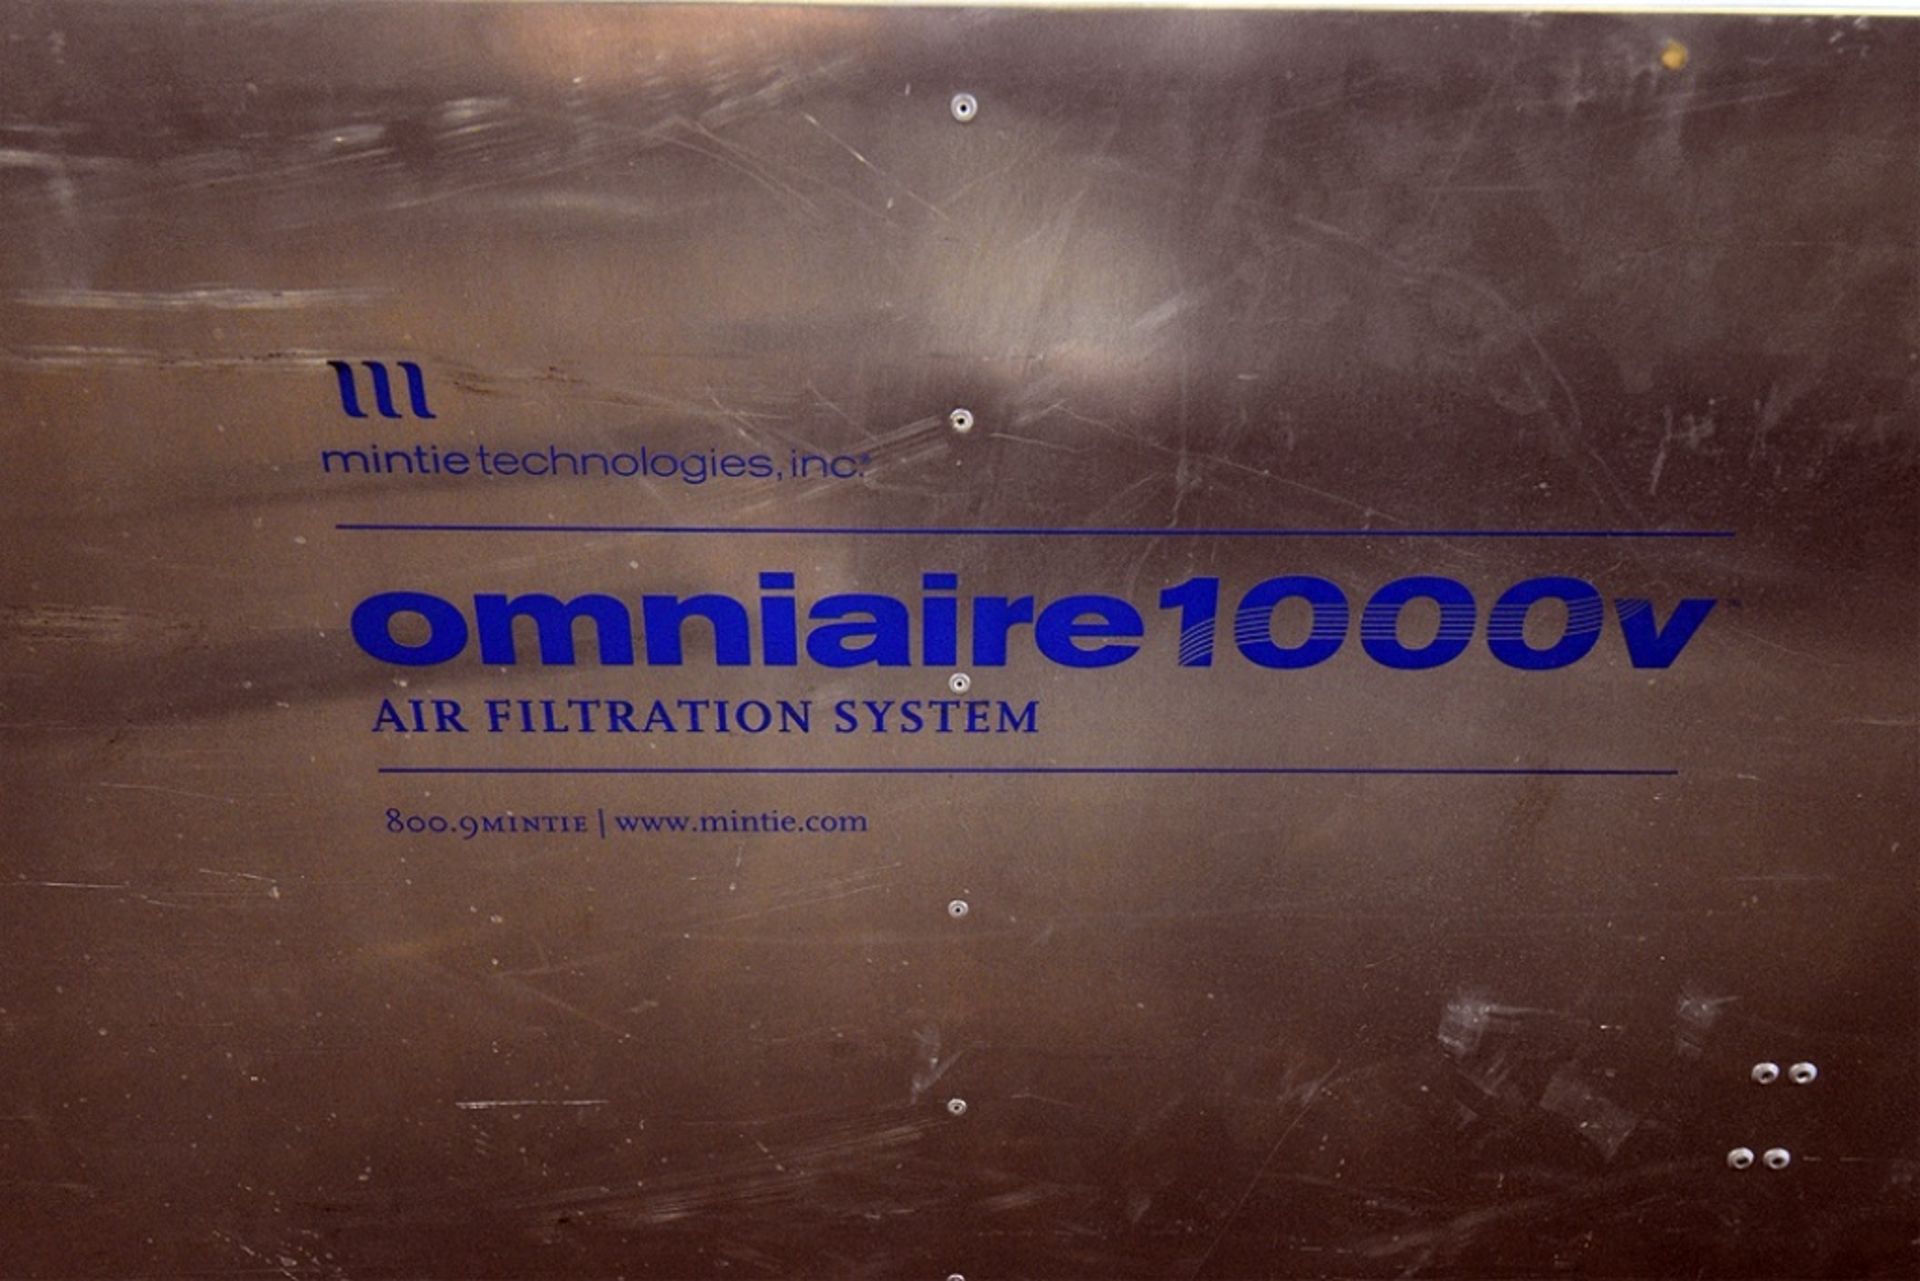 Mintie Technologies Inc. Omniaire 1000v Air Filtration System w/ Filters - Image 3 of 7